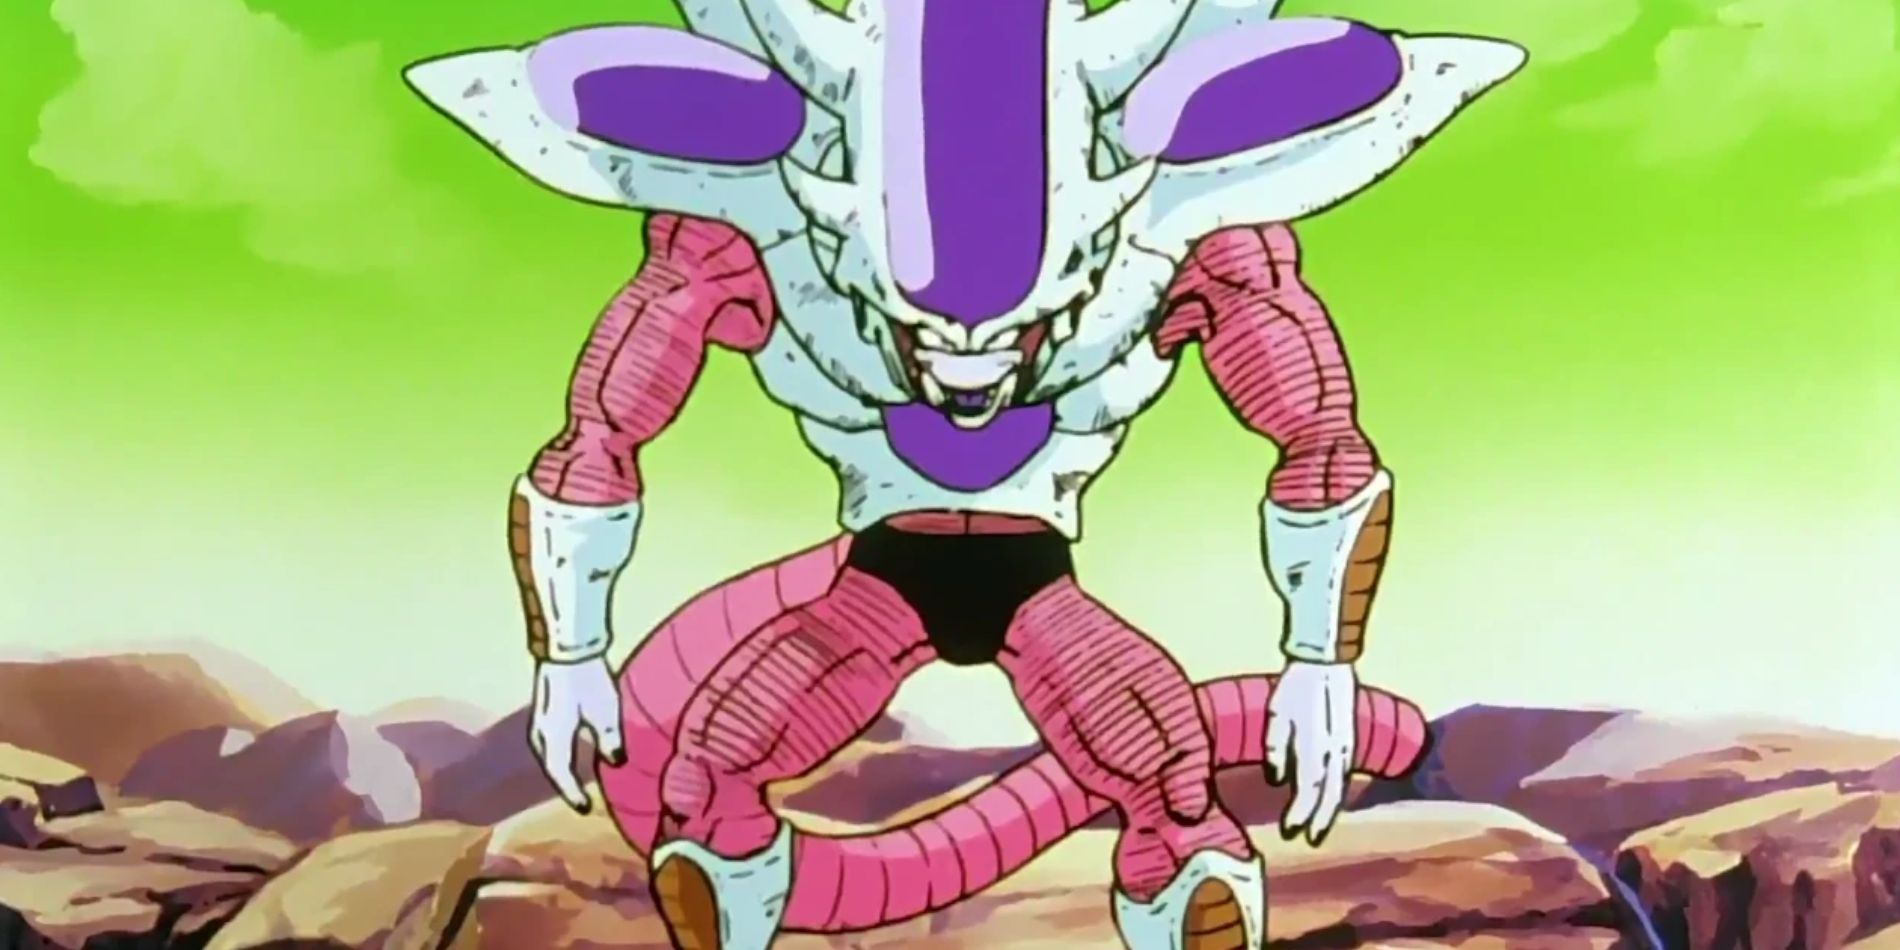 Frieza in his 3rd Form in front of a green sky.